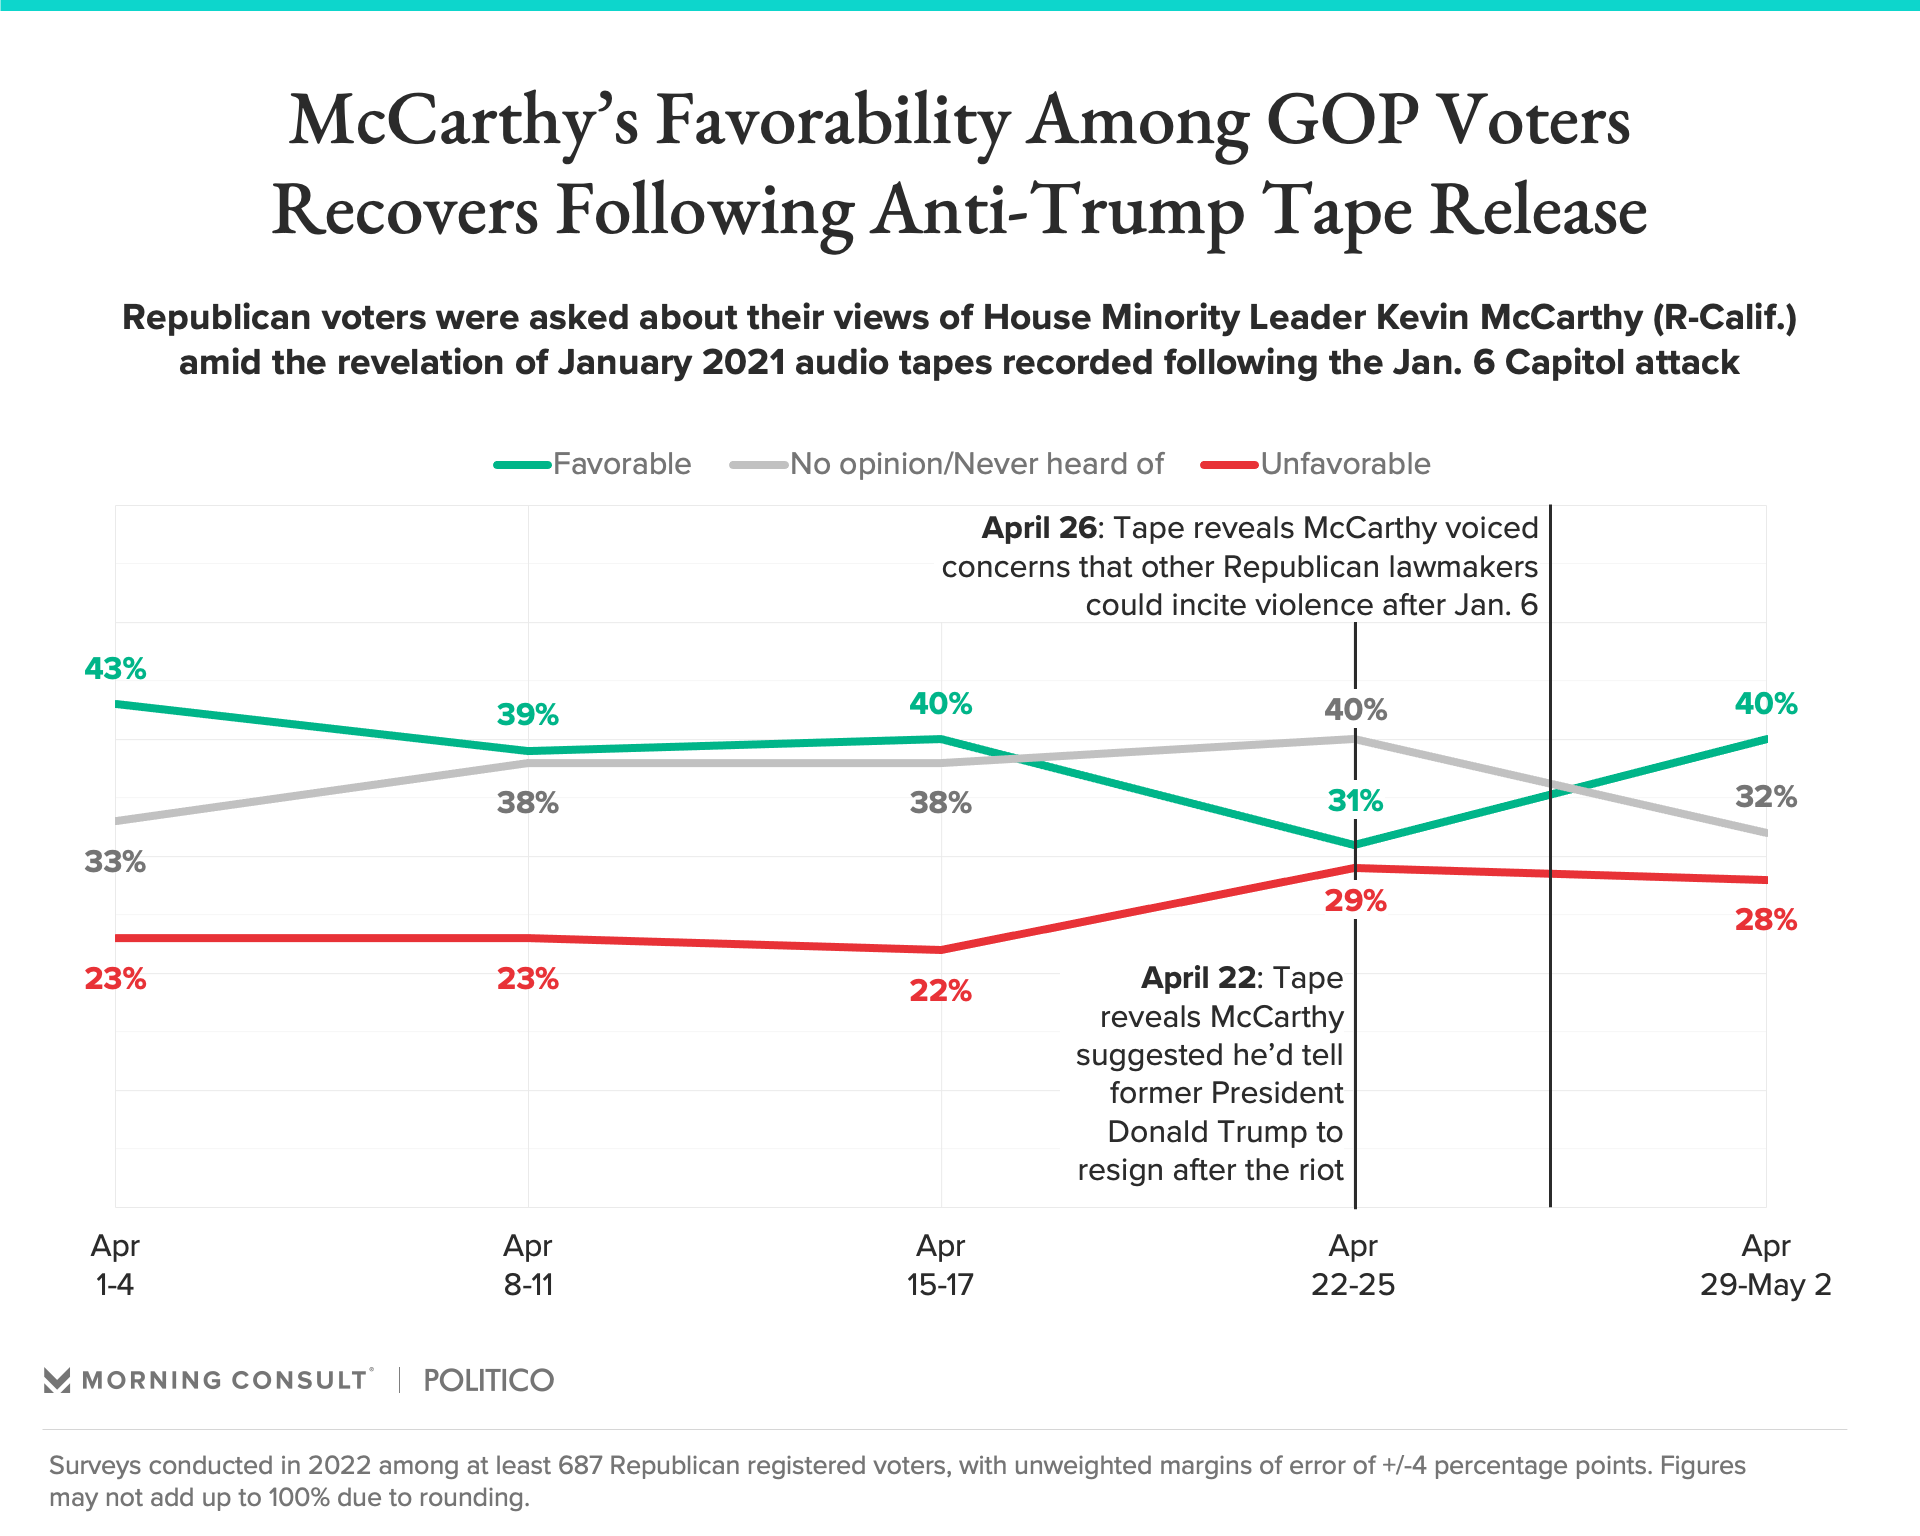 Trend line charts showing Kevin McCarthy's favorability among GOP voters returning to pre-leak levels as of May 2 2022